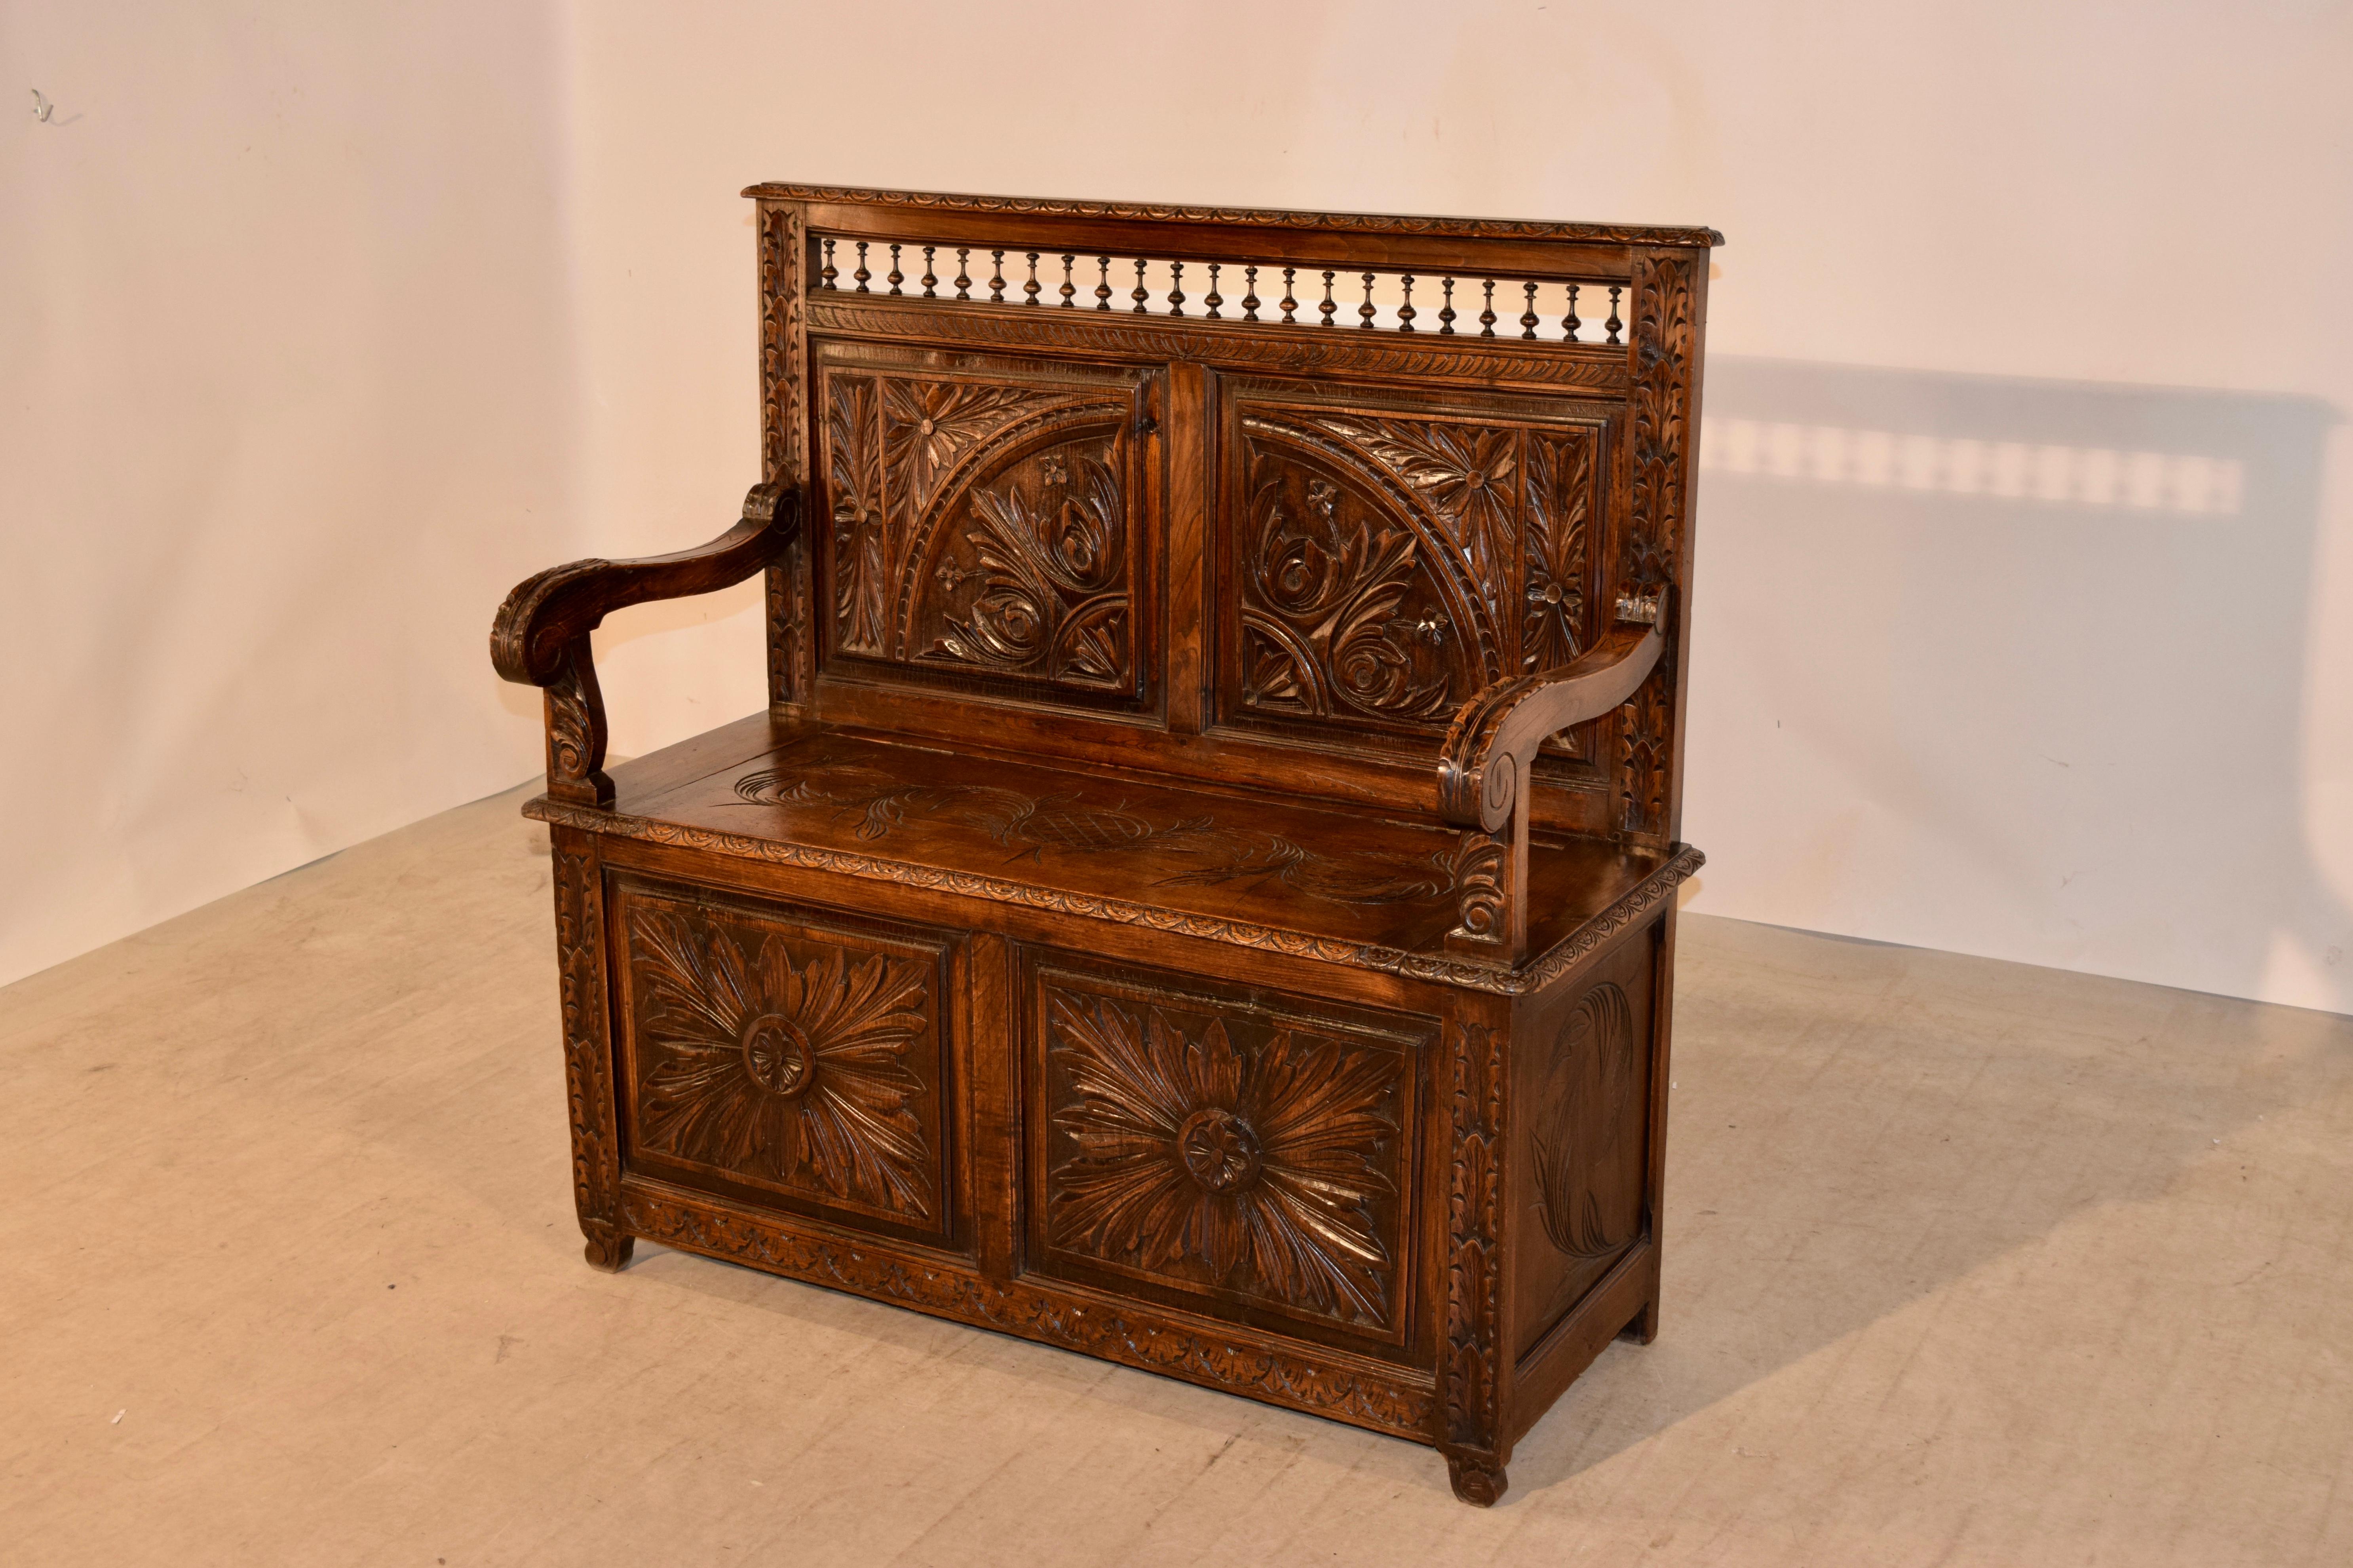 19th century oak bench from Brittany in France. The top is a hand carved decorated molded edge following down to the typical hand-turned spindle design over two hand carved raised panels over a seat which lifts to reveal storage and has two hand